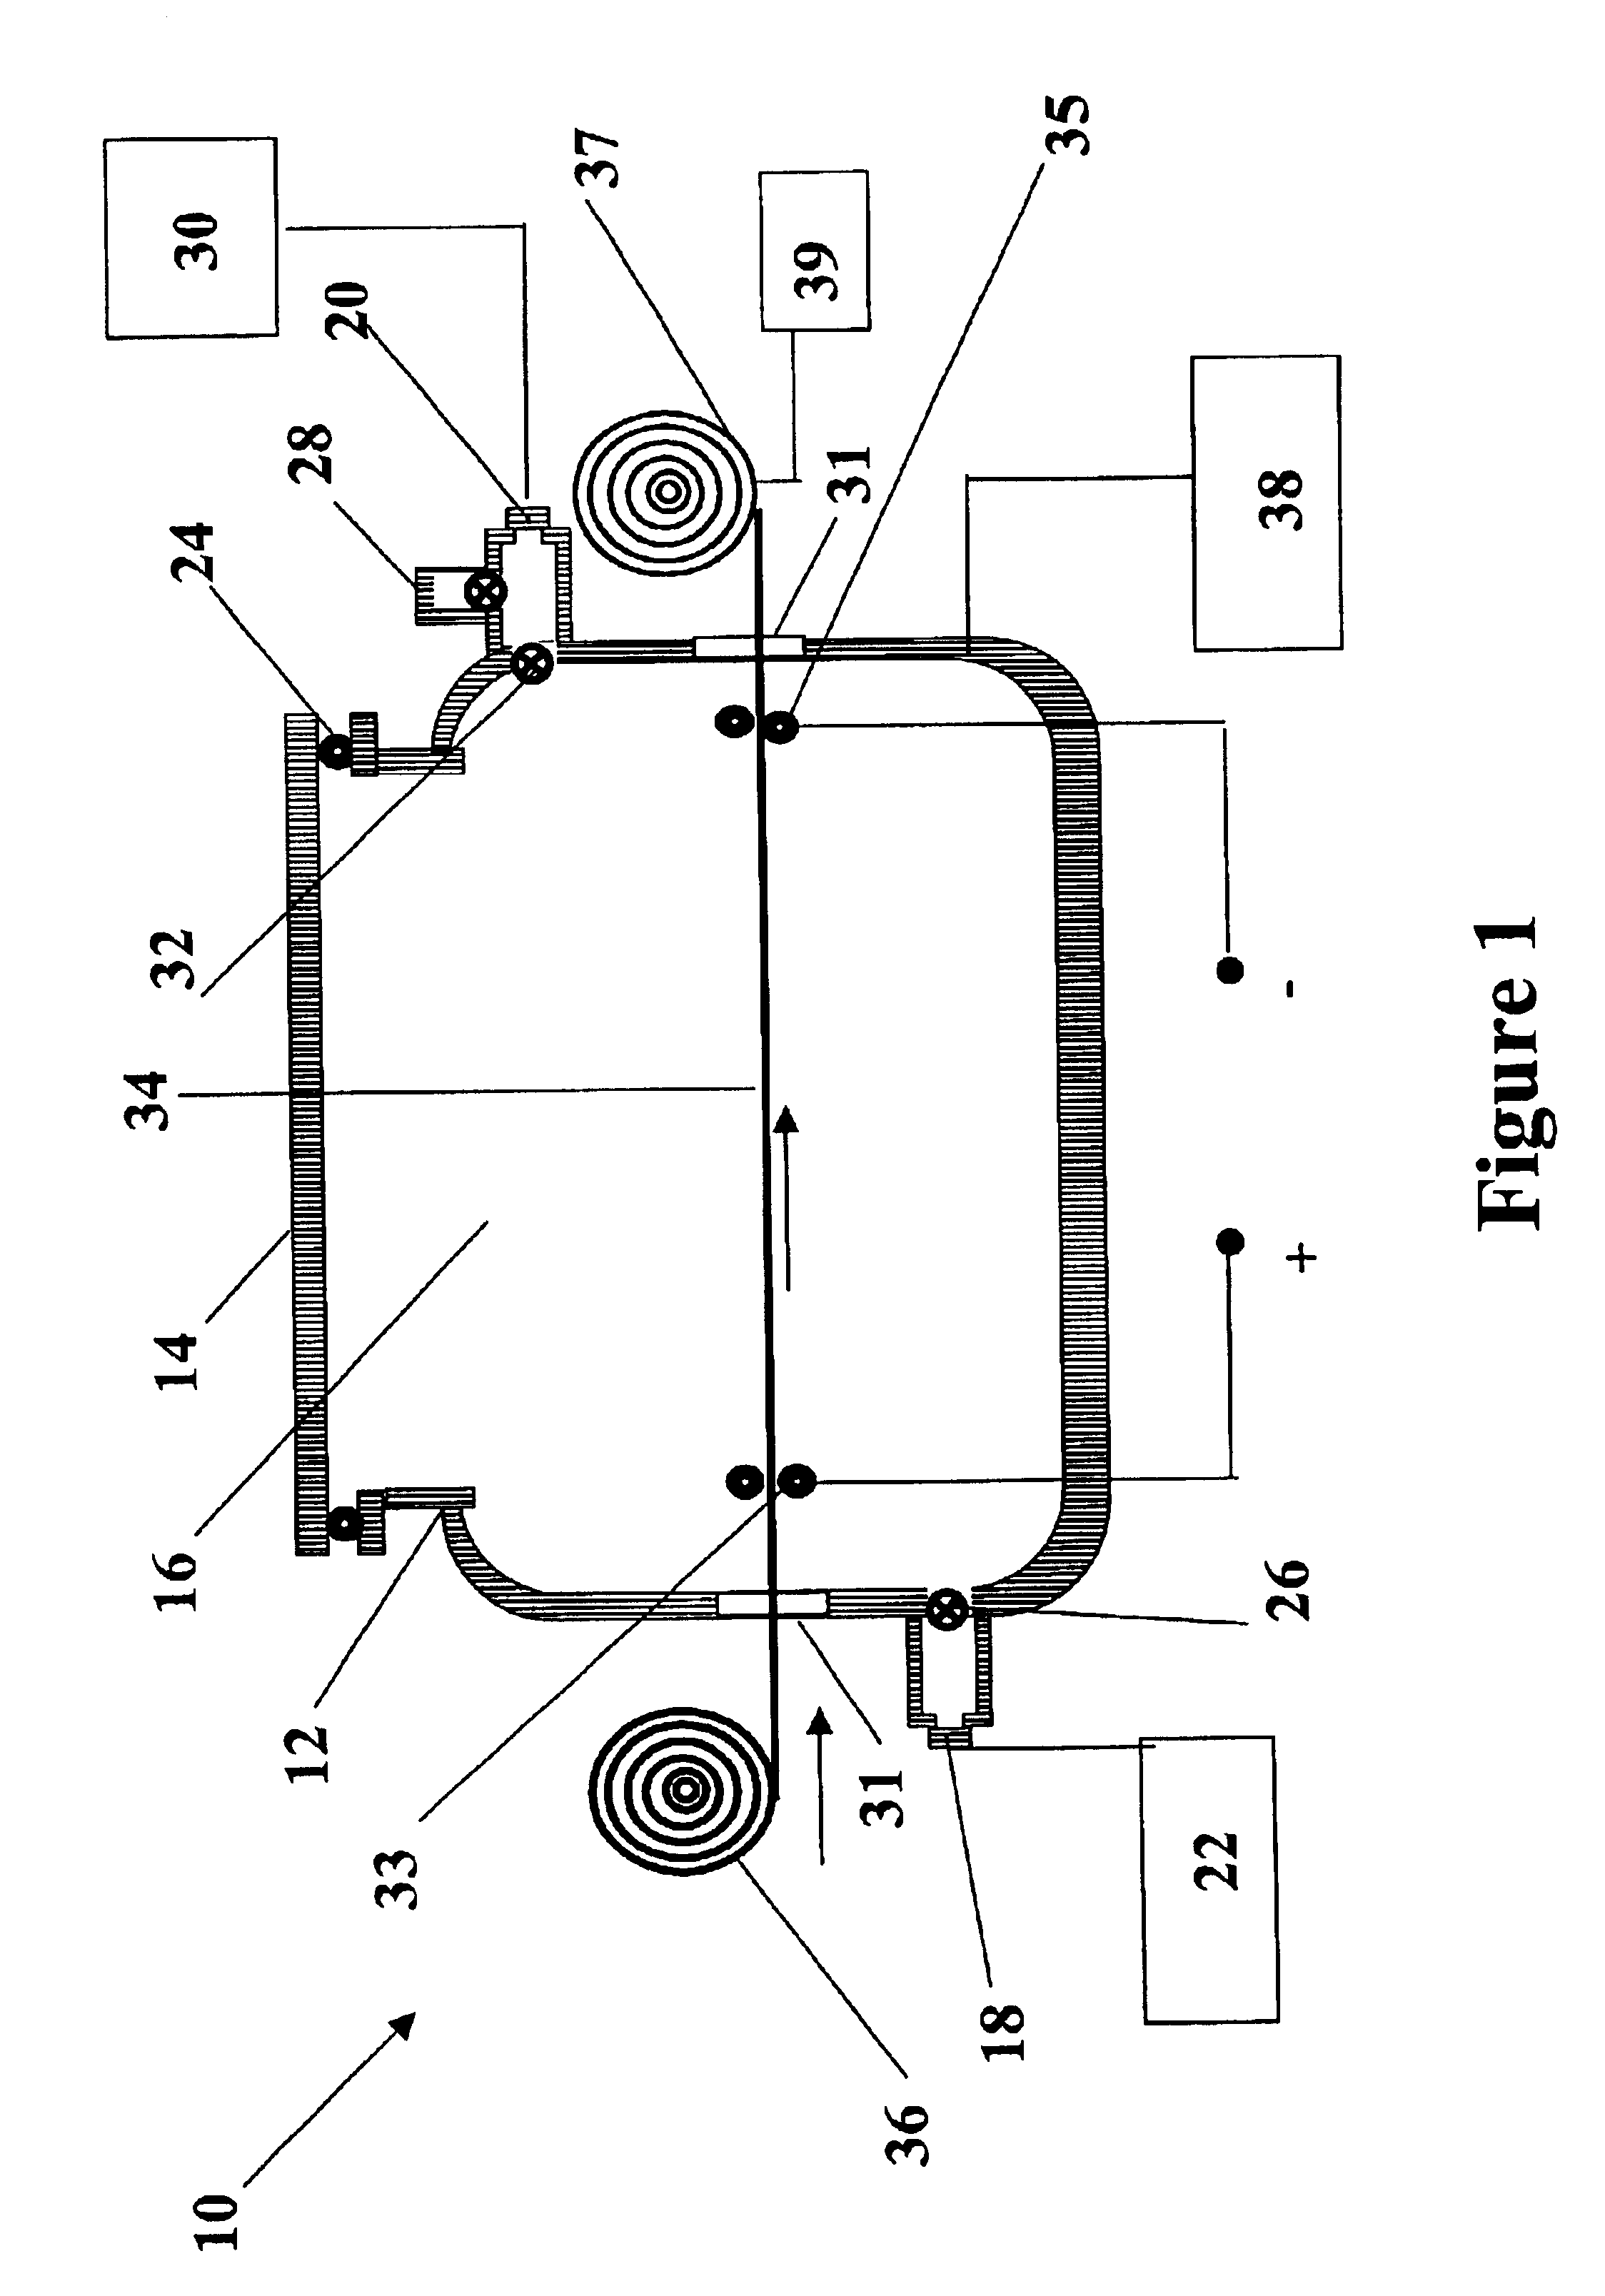 Vapor delivery system for solid precursors and method of using same